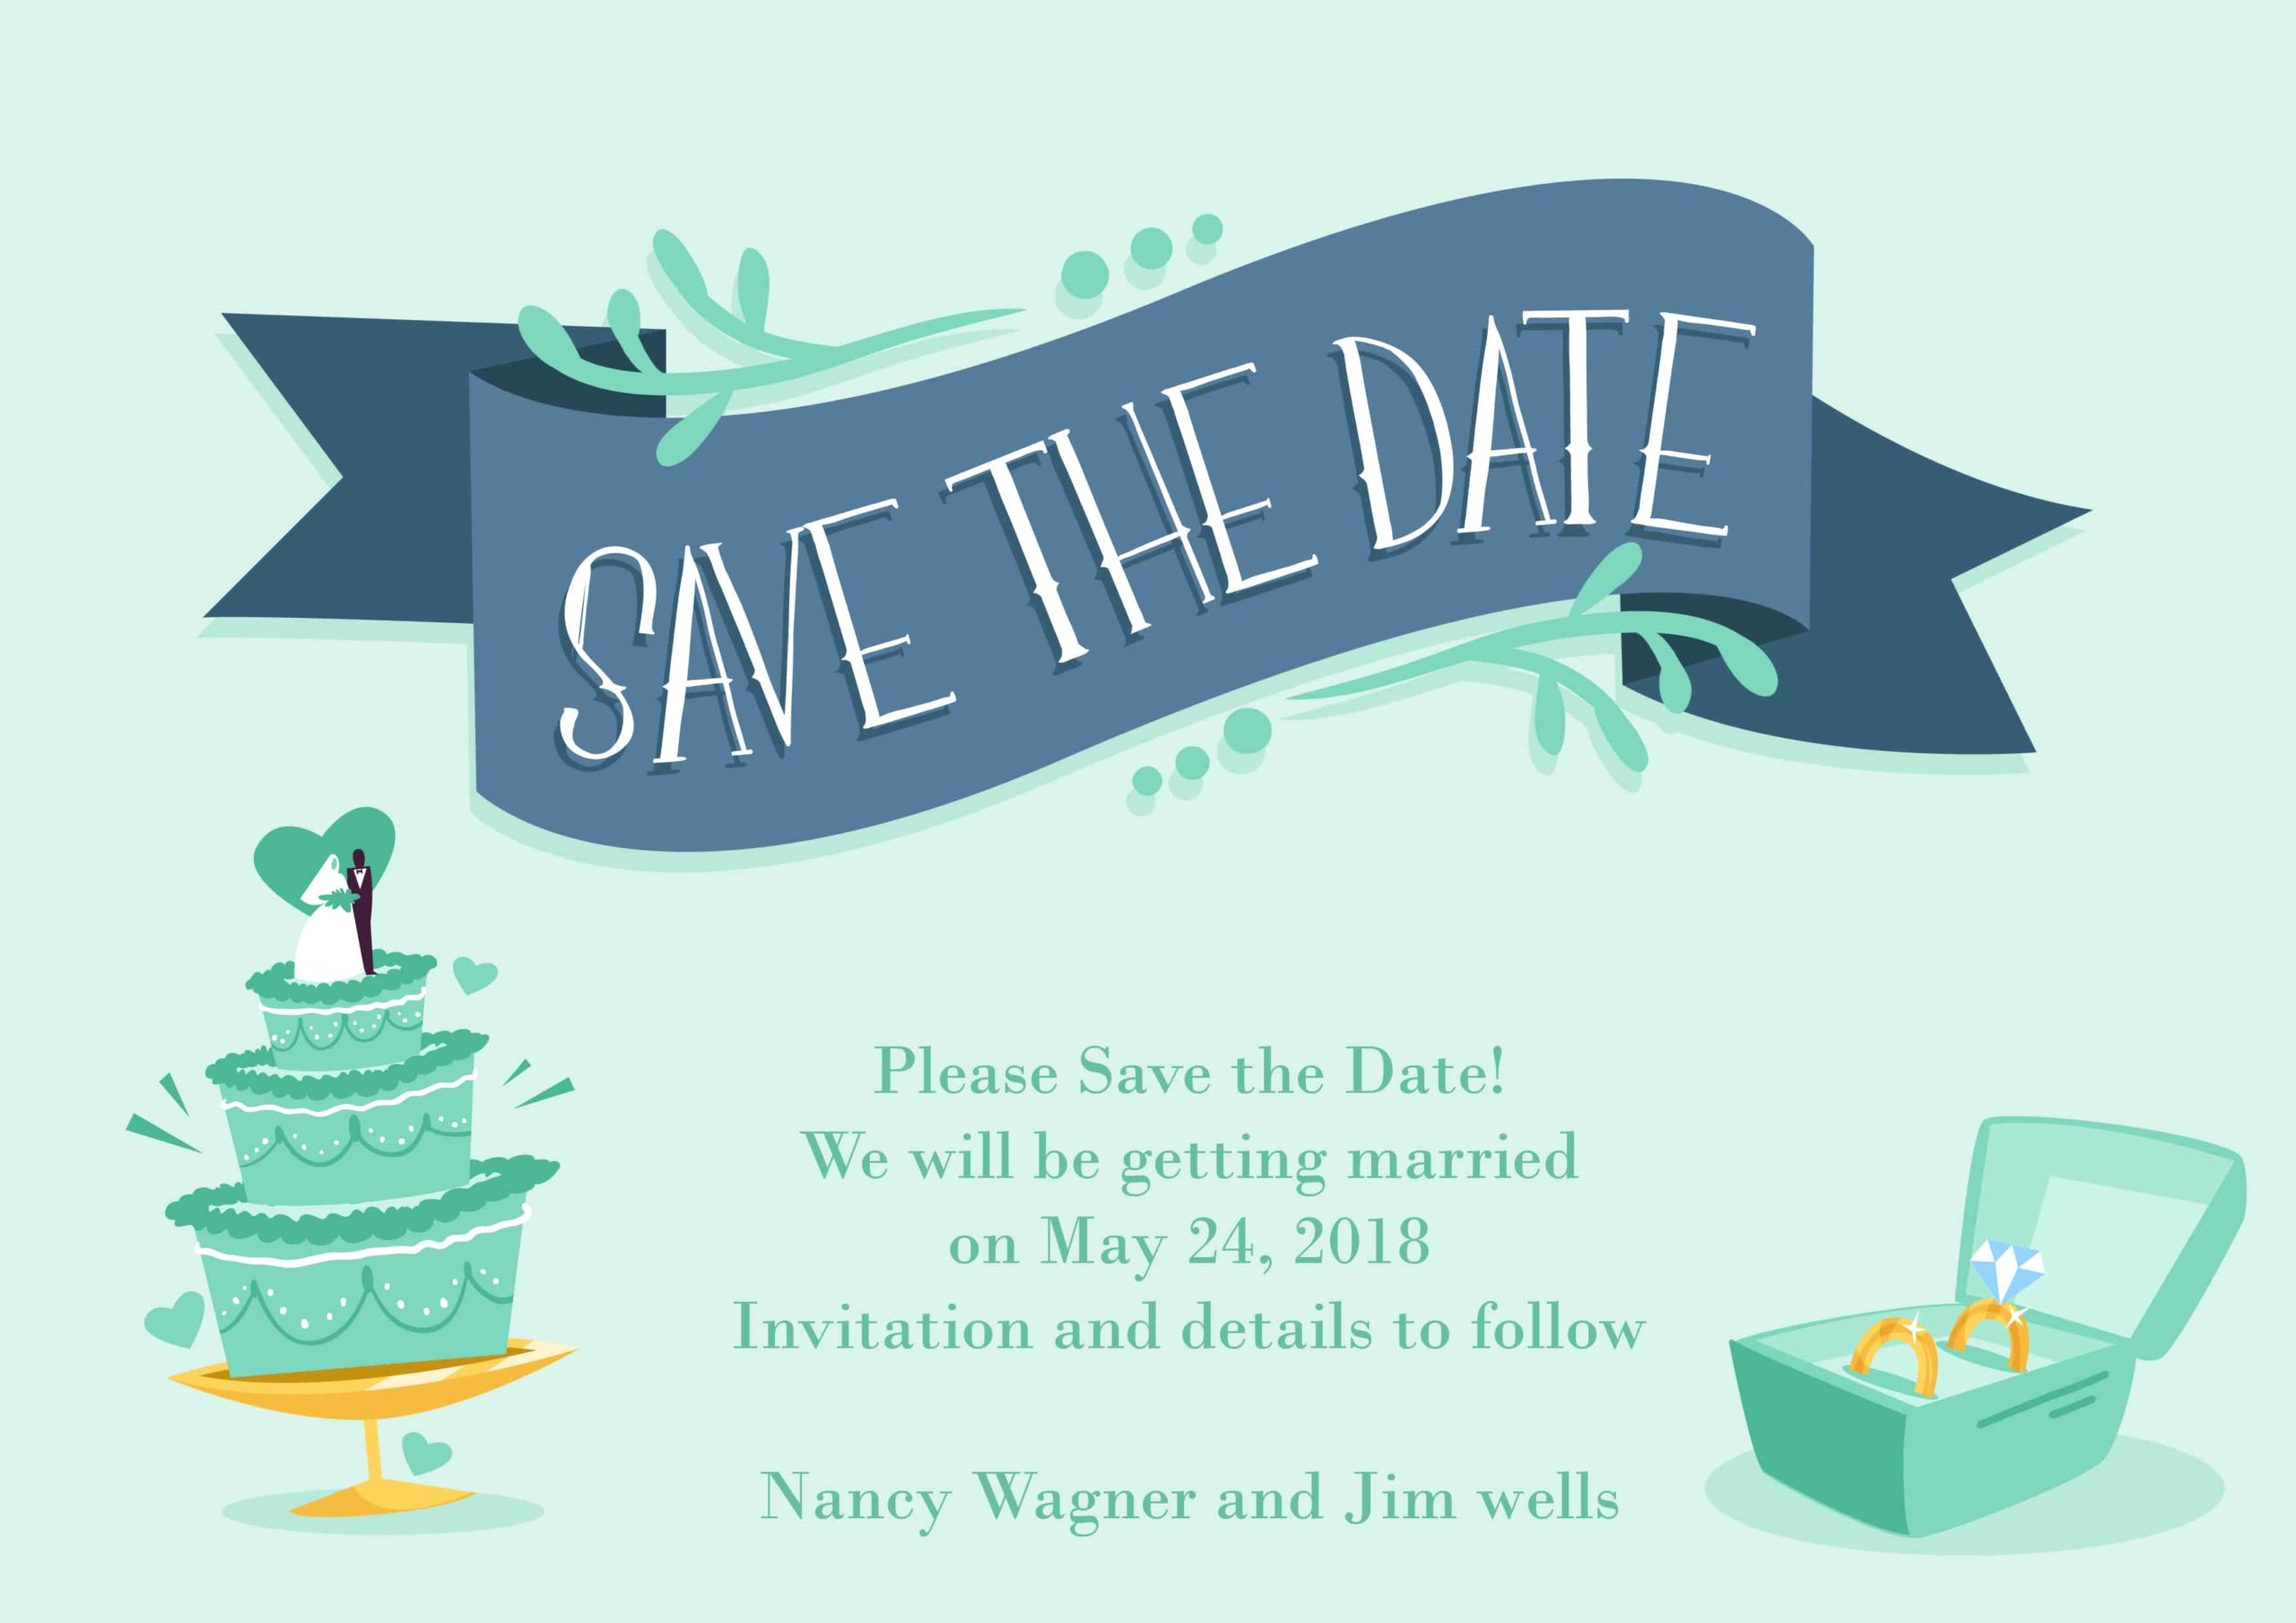 buy-date-vector-image-save-the-date-vector-image-invitation-template